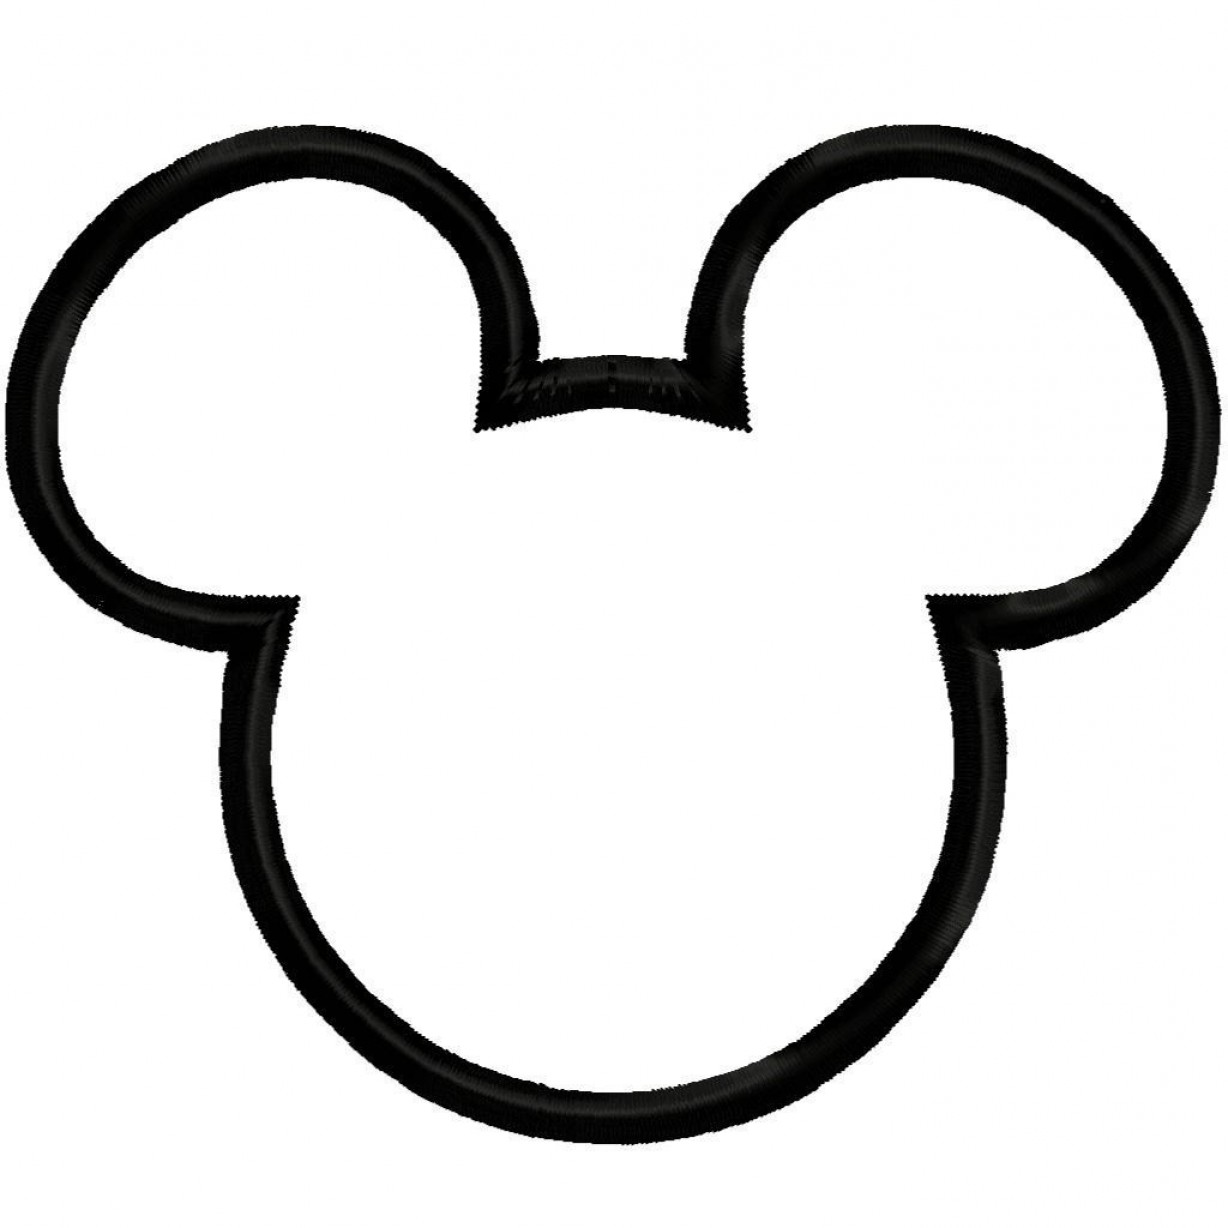 Mickey Mouse Silhouette Printable - Customize and Print